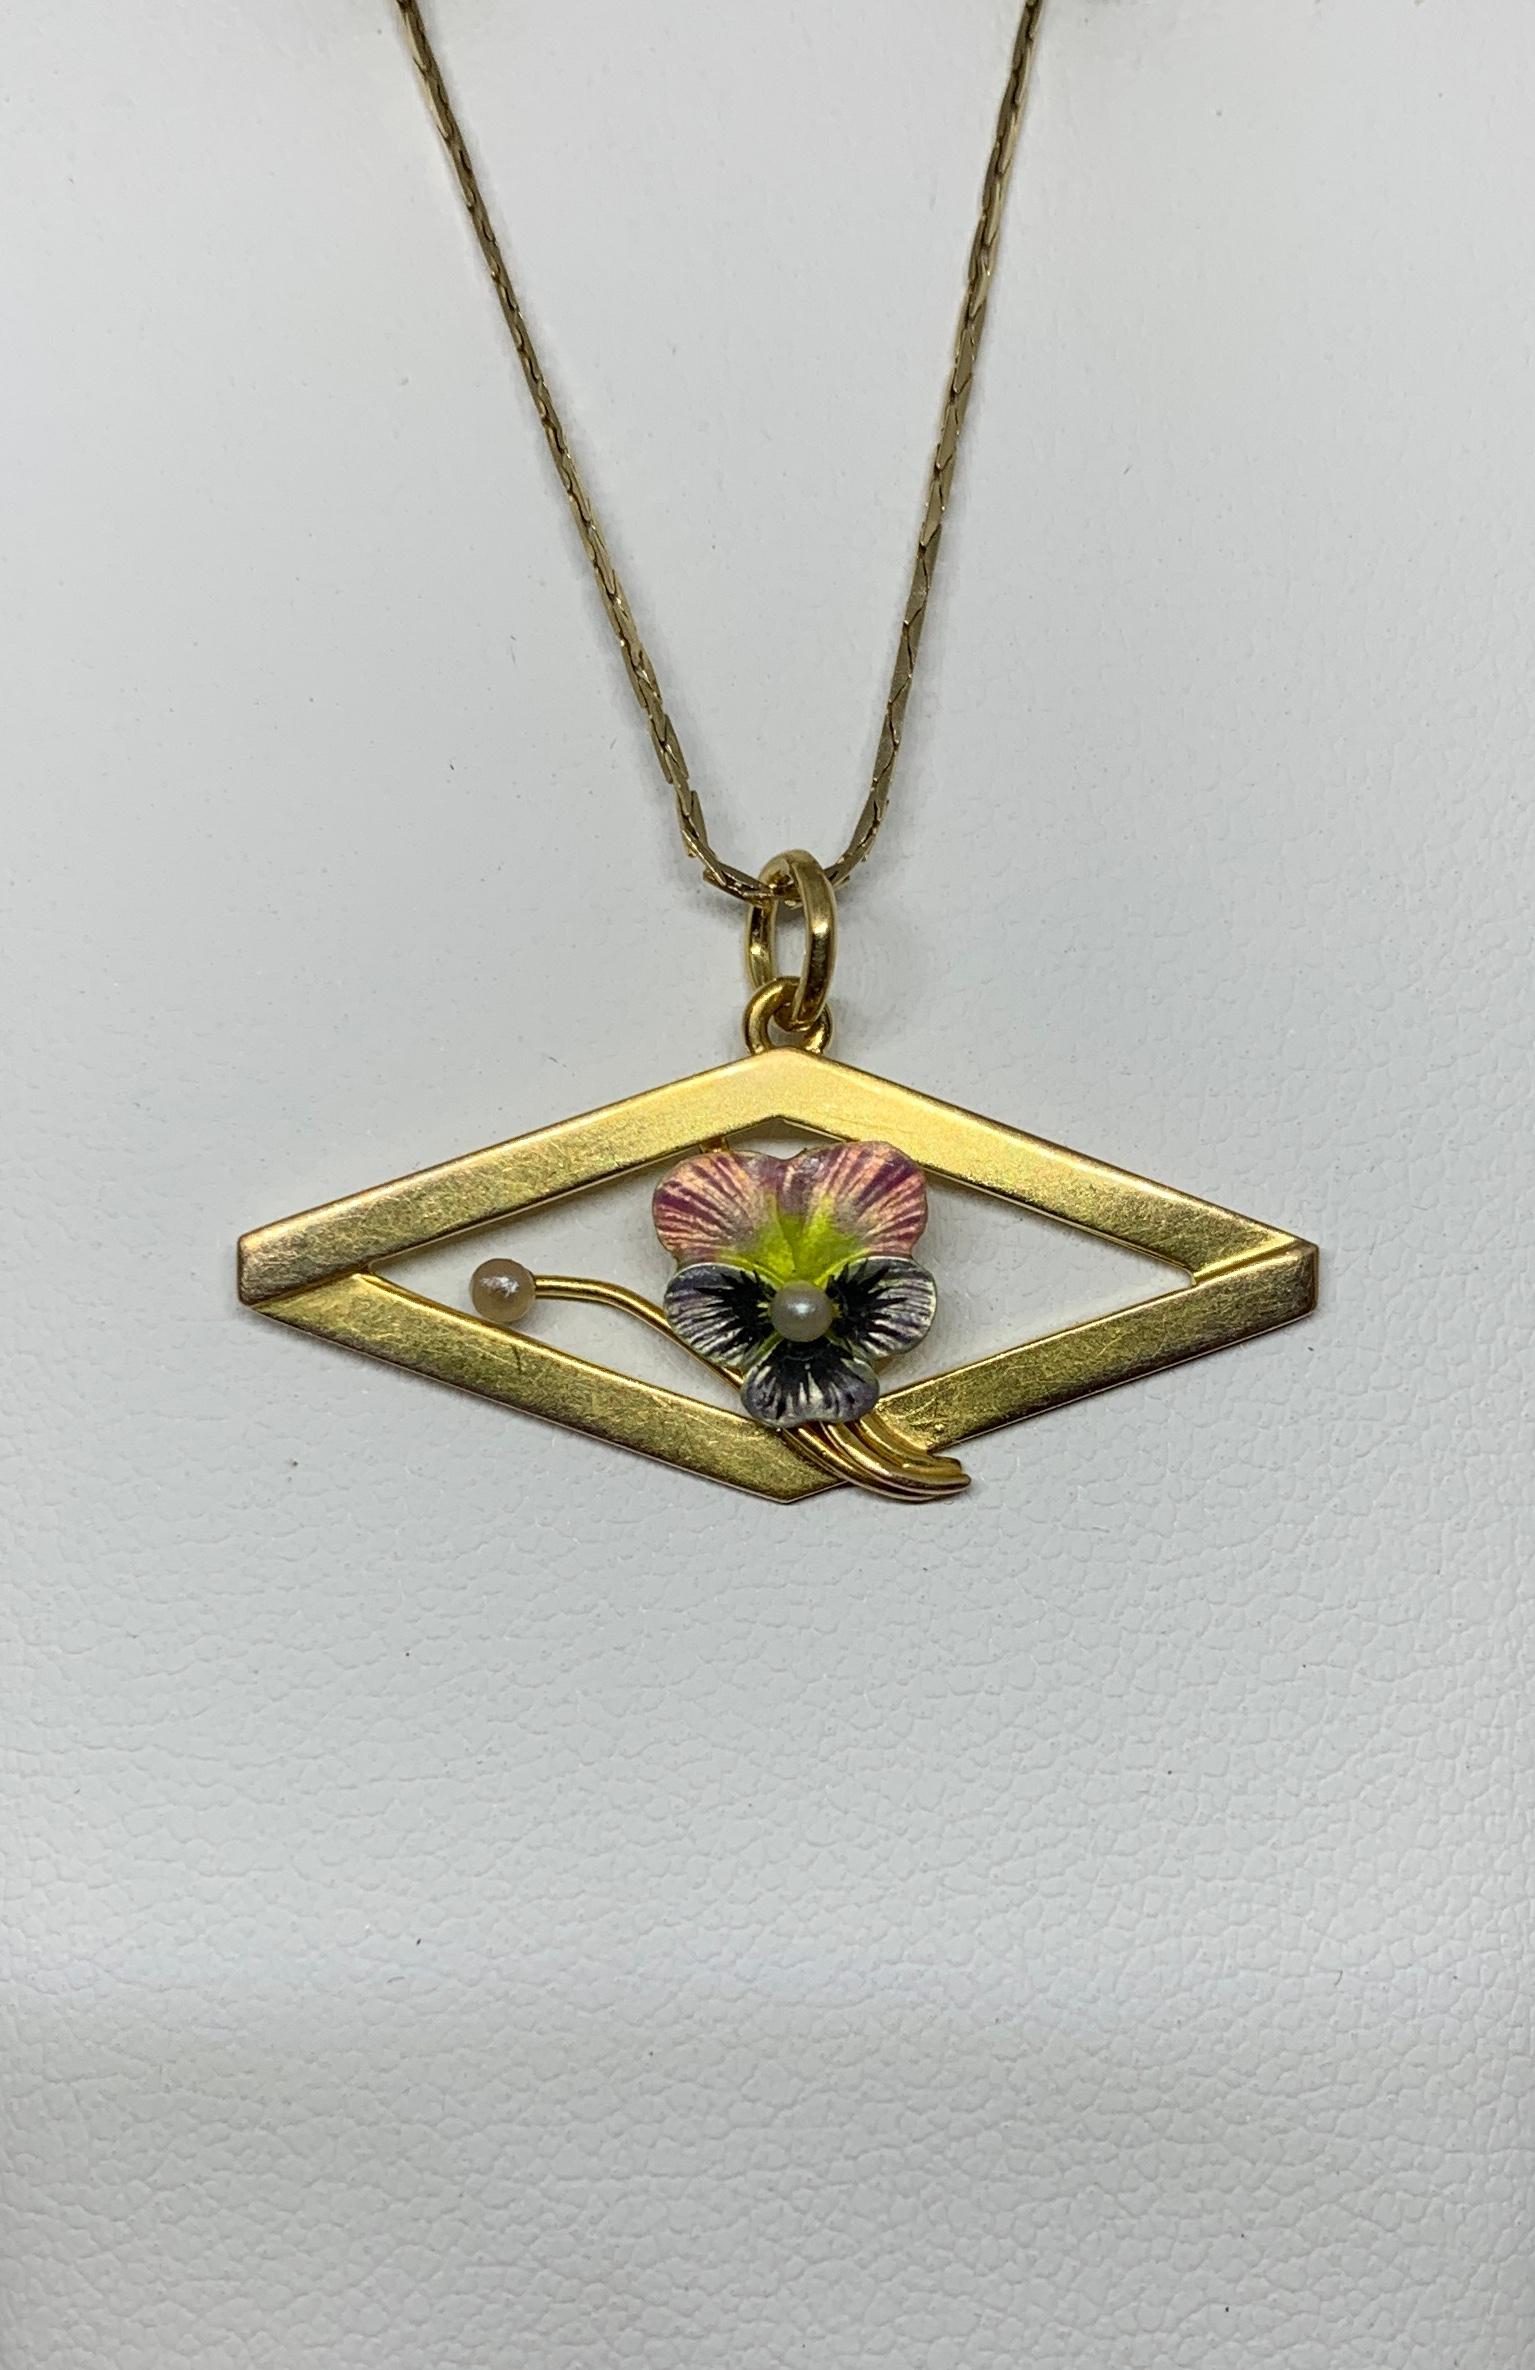 THIS IS A GORGEOUS VICTORIAN - ART DECO PENDANT WITH A BEAUTIFUL PINK AND BLUE ENAMEL PANSY FLOWER WITH A PEARL IN THE CENTER AND SET AS A FLOWER BUD.  THE FLOWER IS SET IN AN ELEGANT GOLD SURROUND WITH LOVELY ART DECO DESIGN.  THE PENDANT IS 10